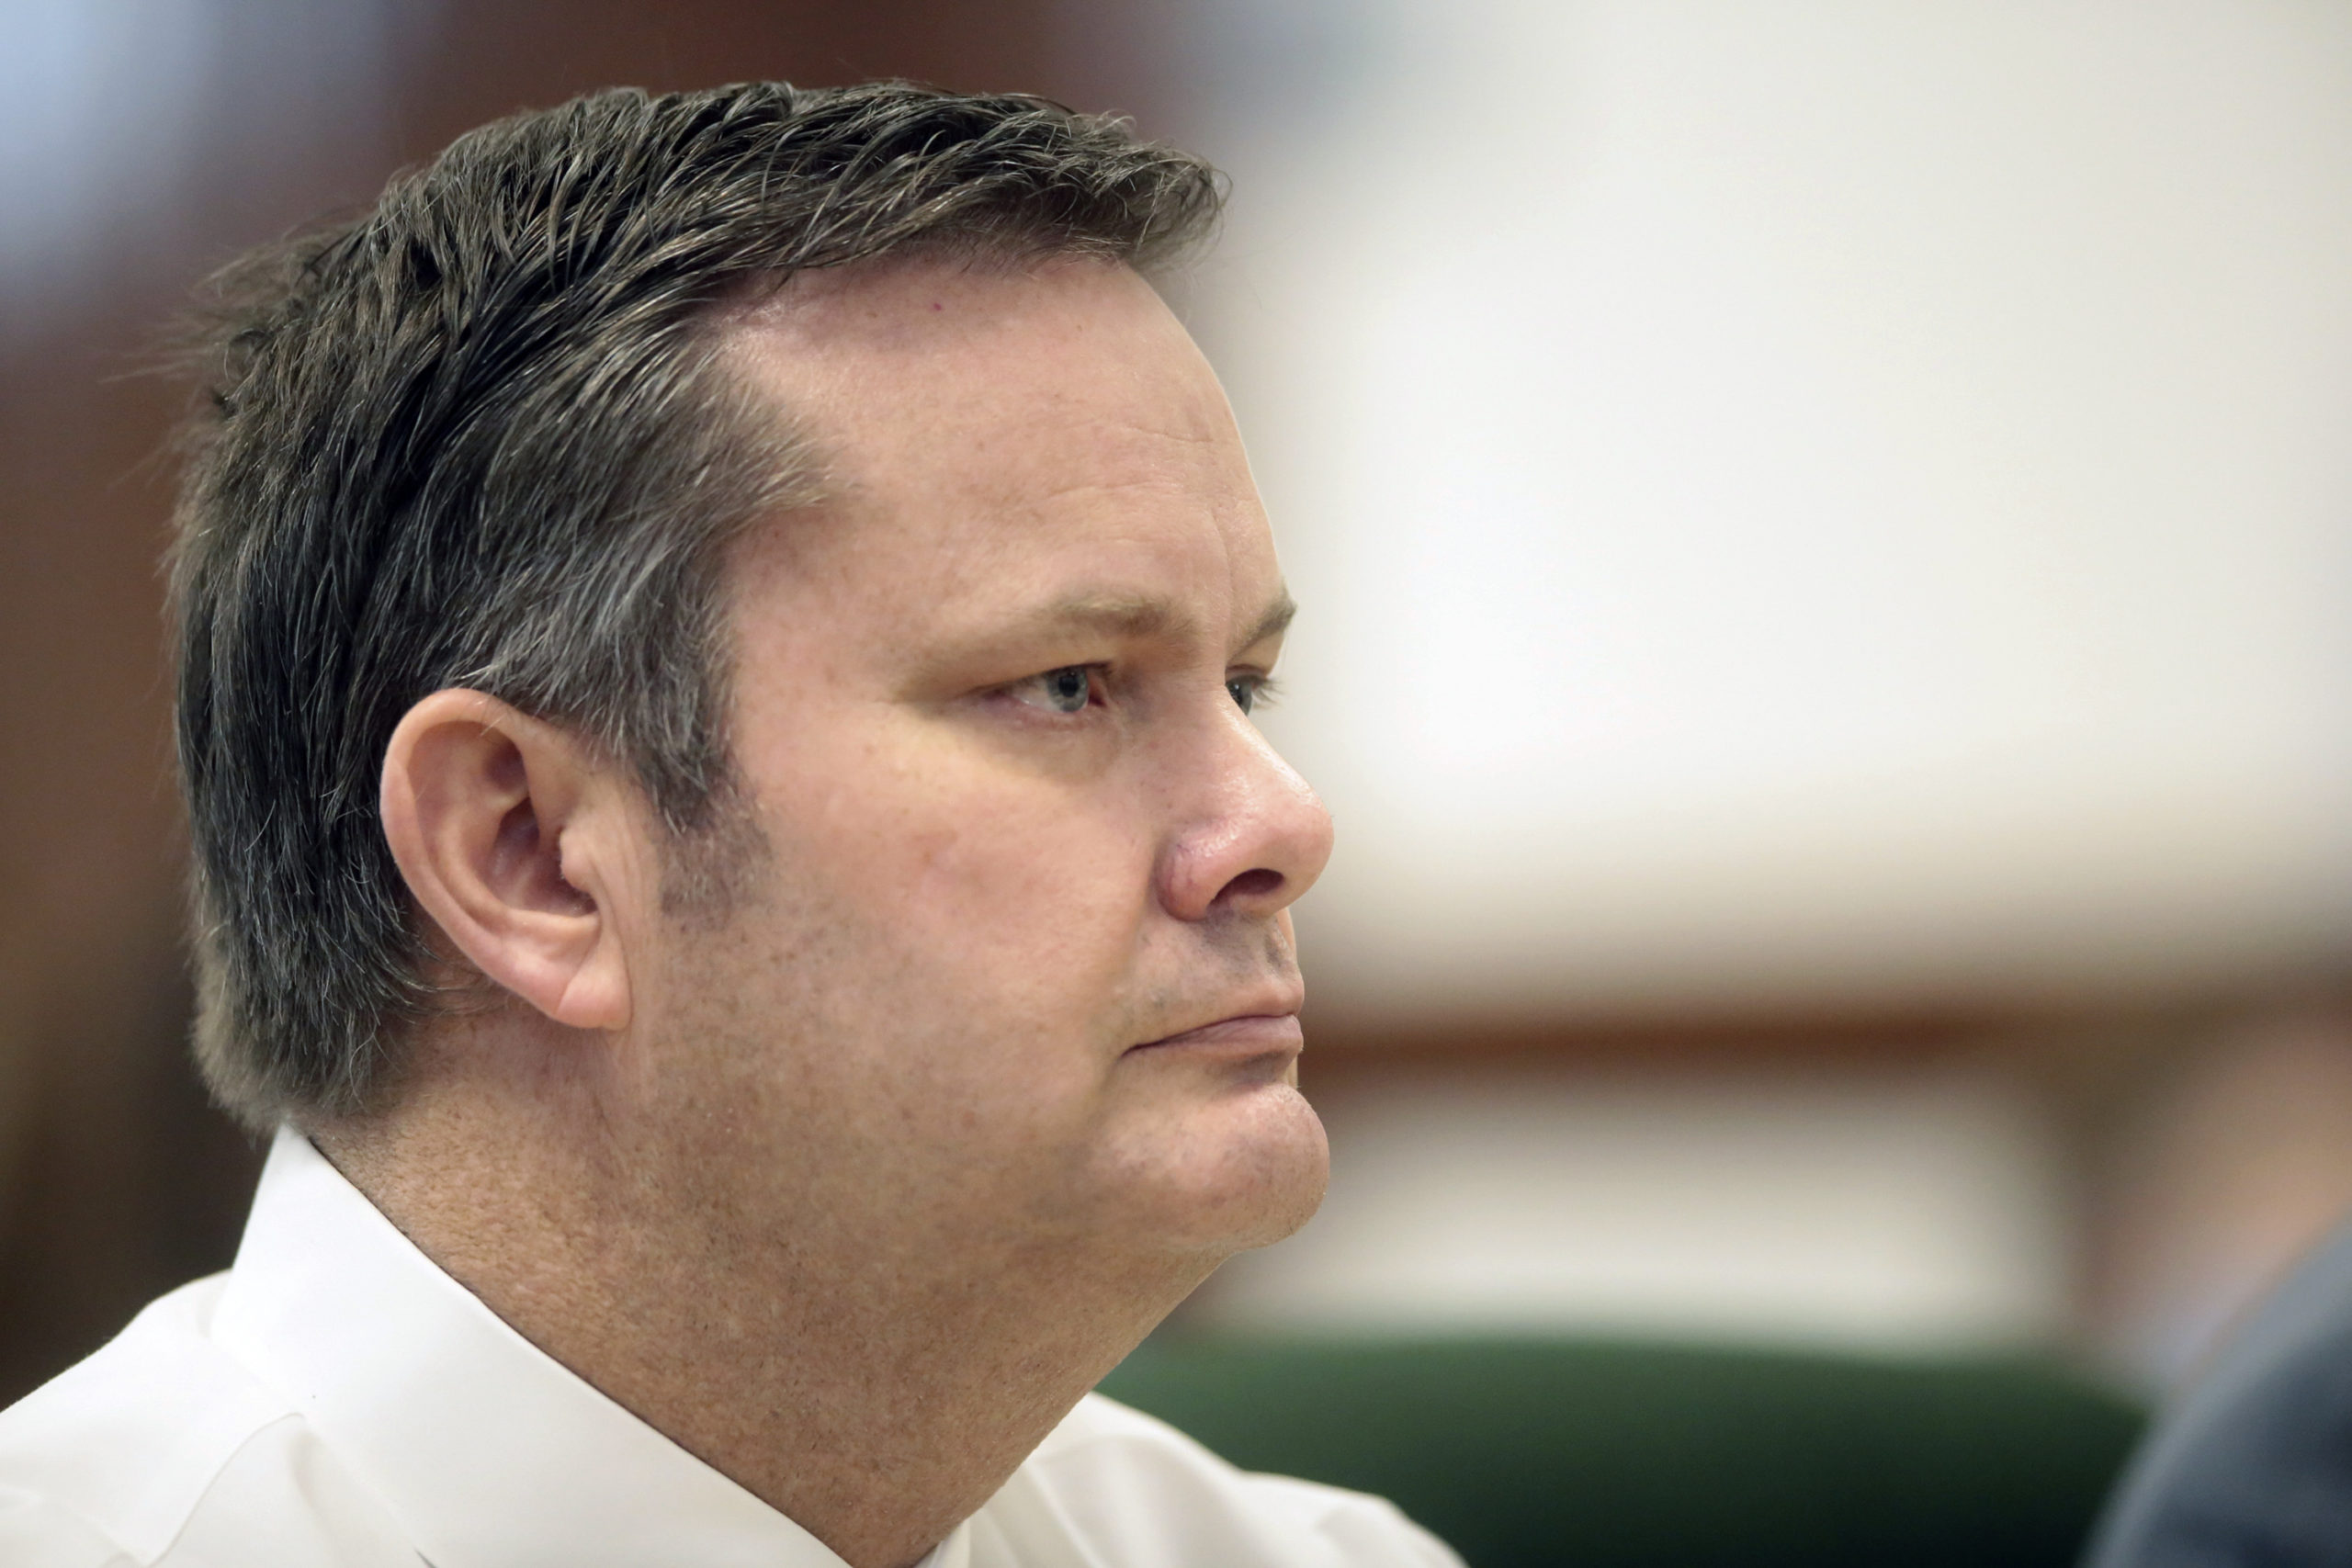 FILE - Chad Daybell appears during a court hearing in St. Anthony, Idaho, Aug. 4, 2020. An Idaho ju...